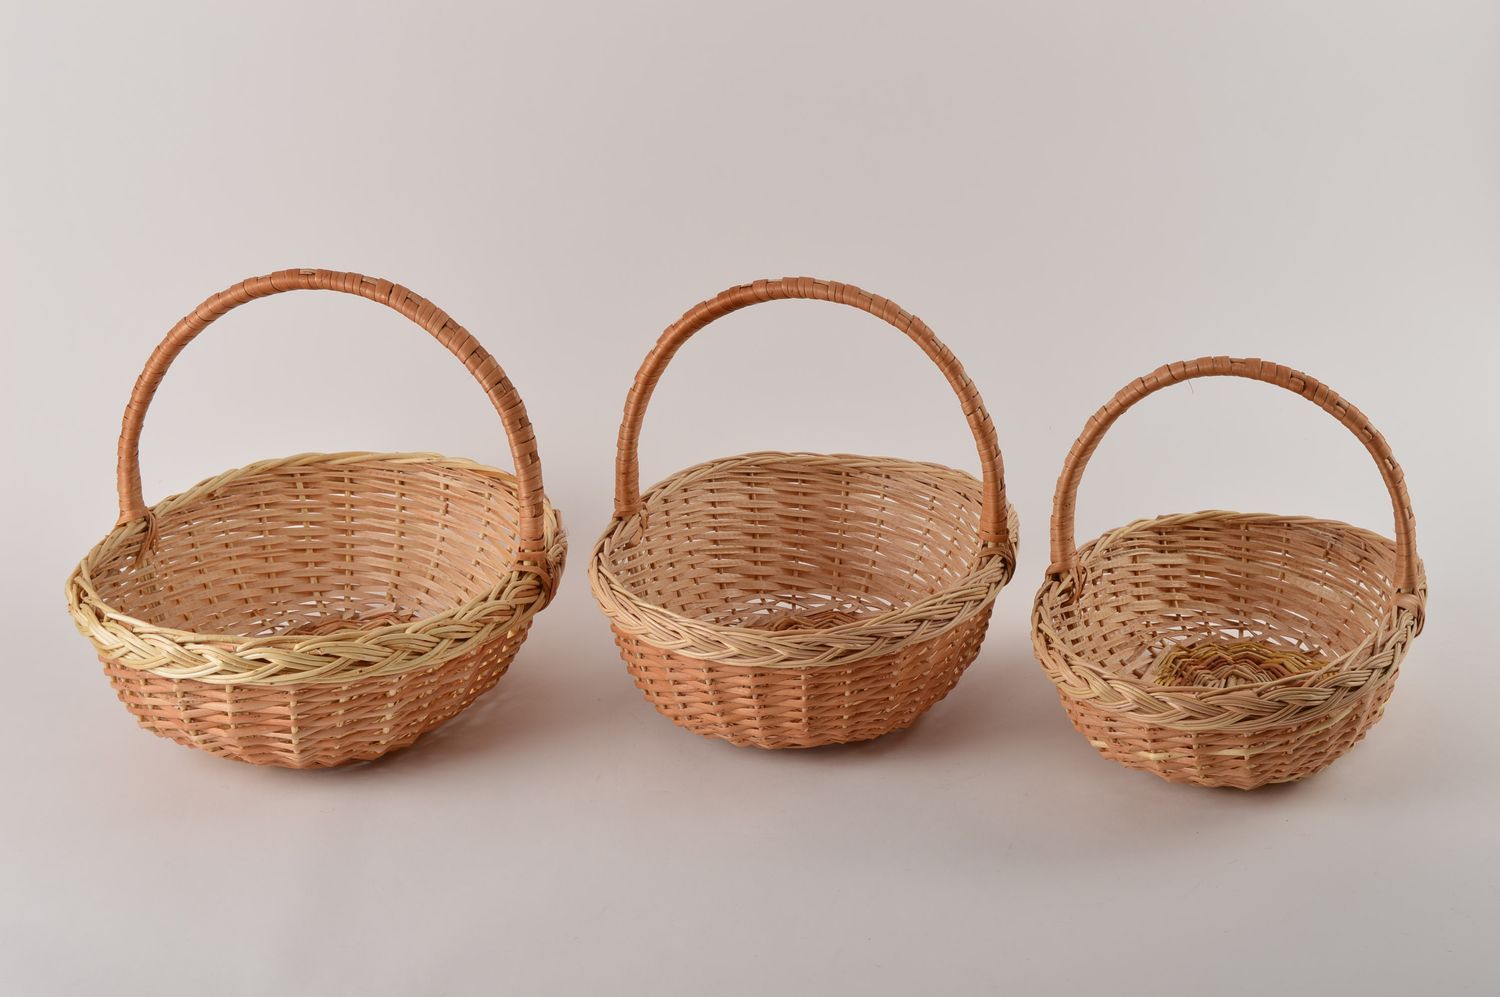 Beautiful handmade Easter basket woven basket design home goods small gifts photo 2